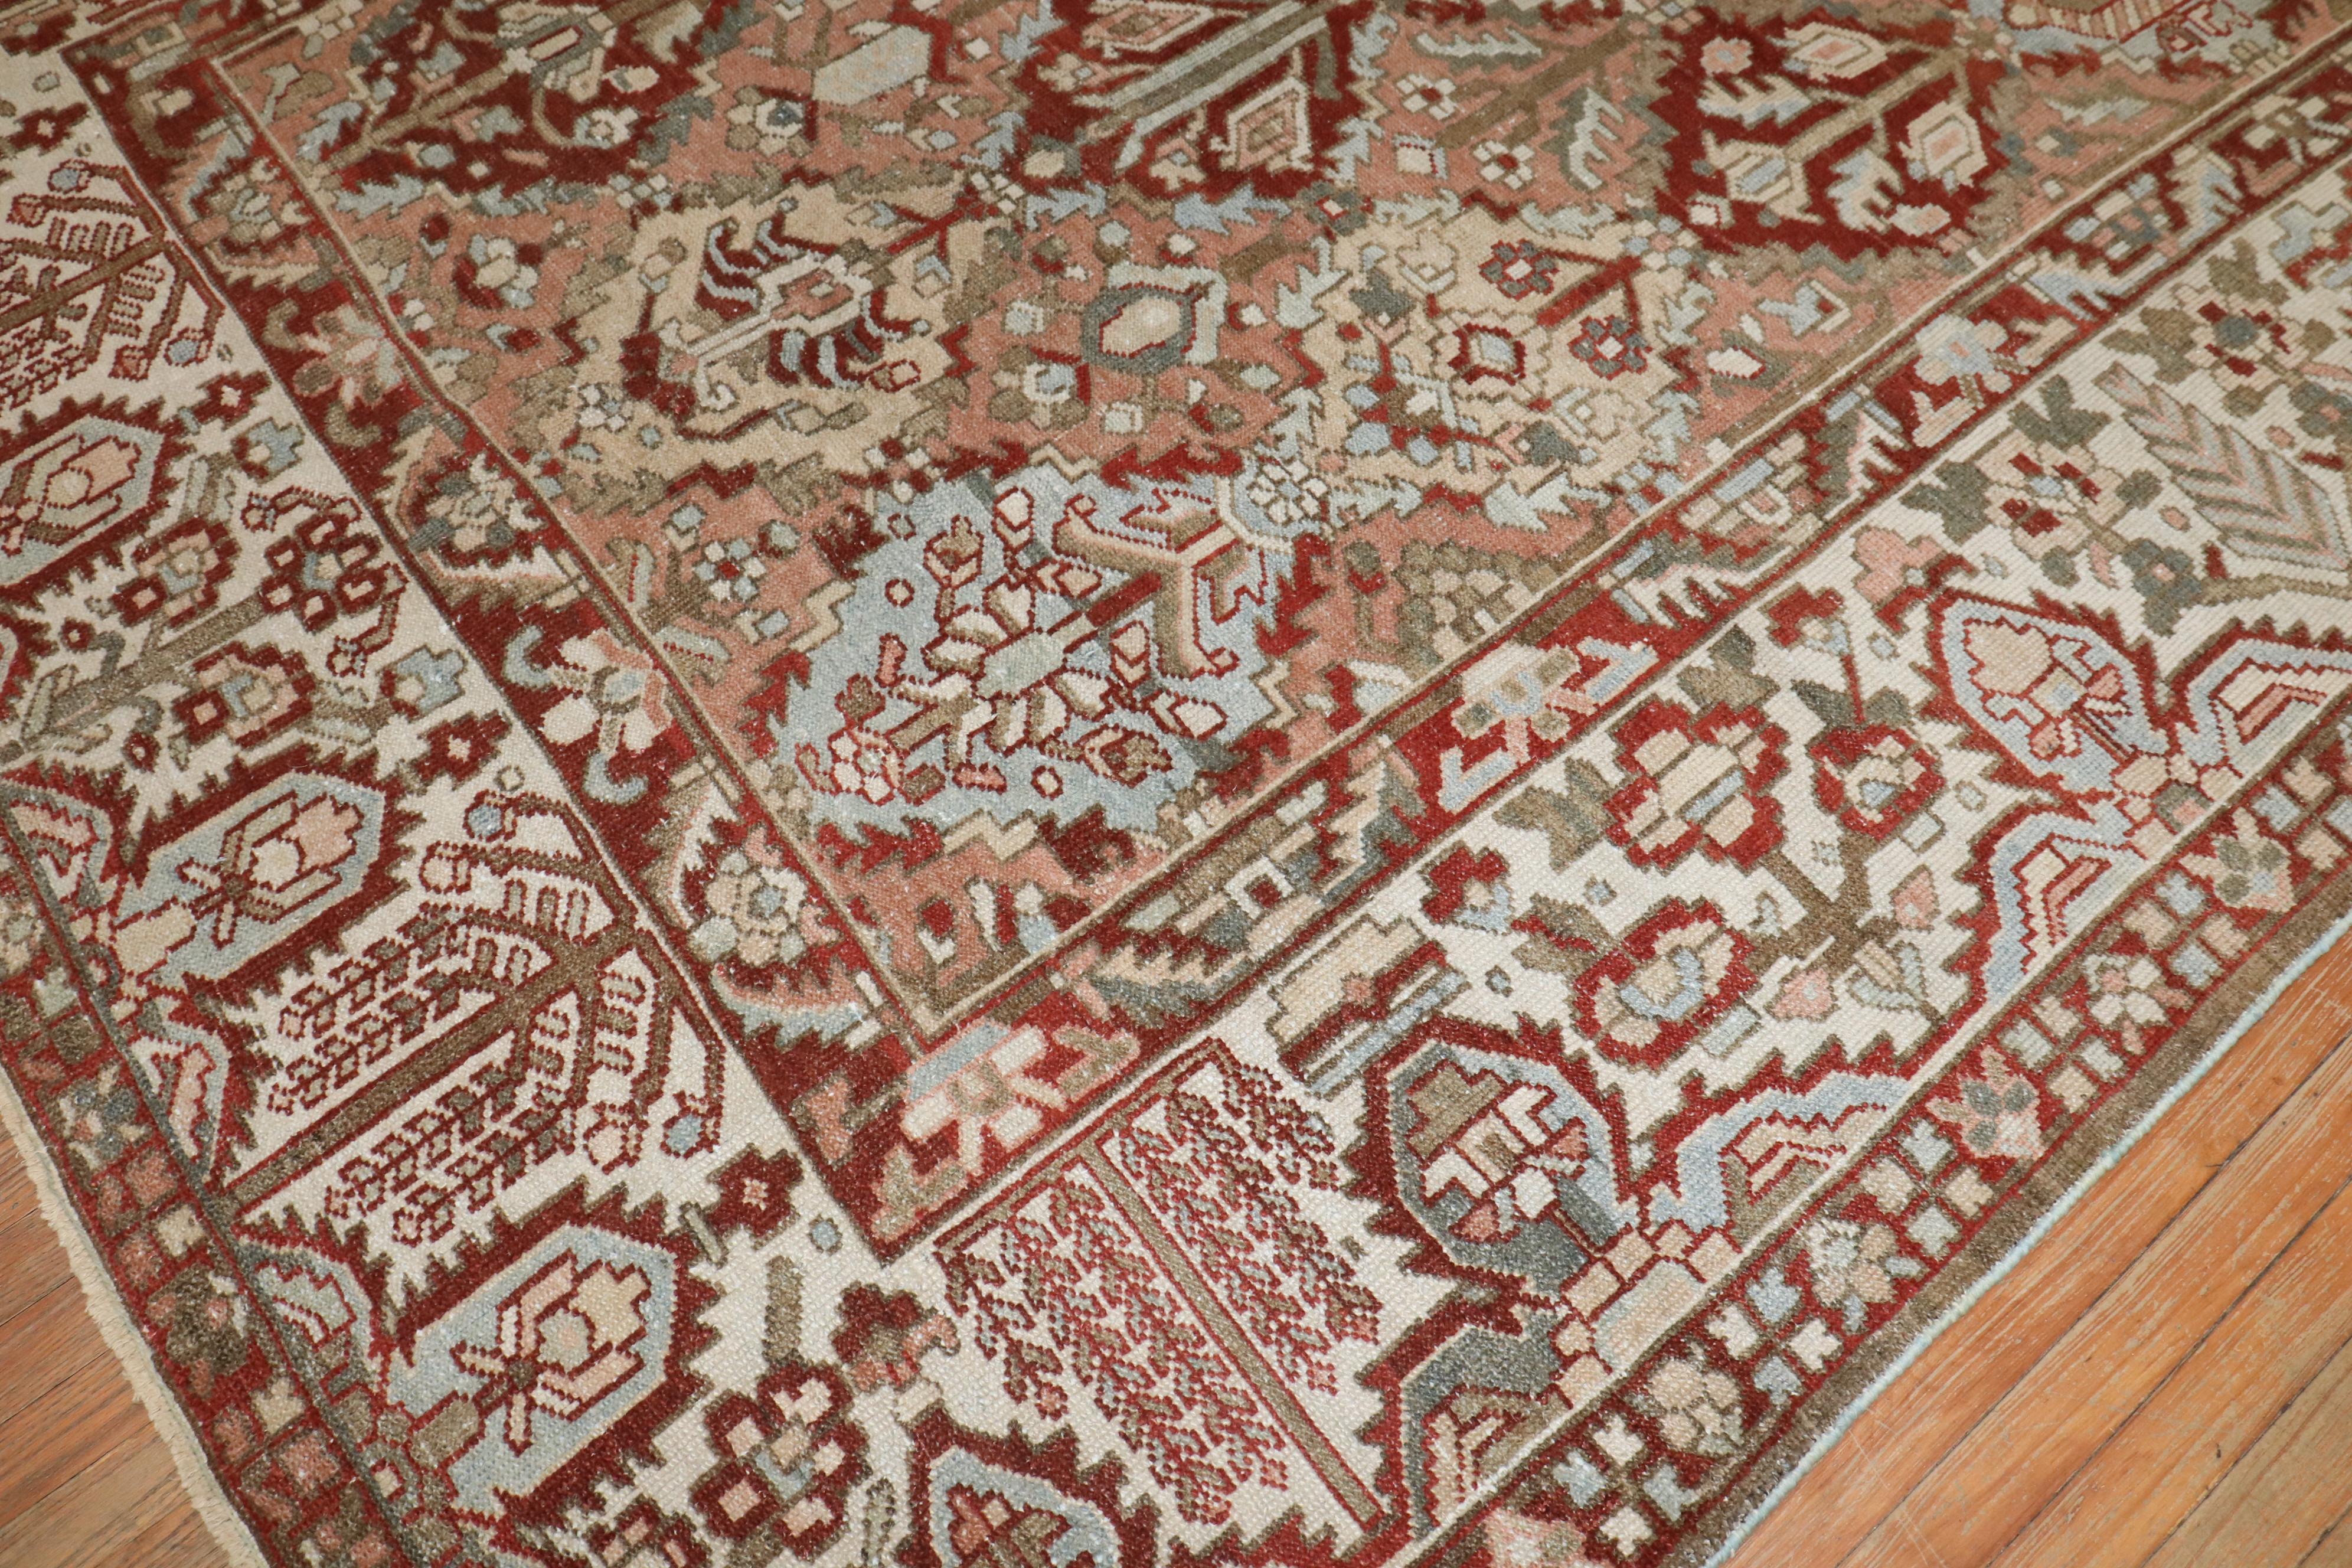  Geometric Small room-size Persian Bakhtiari rug with an all-over geometric design 

Measures: 7'5'' x 10'4'' circa 1940